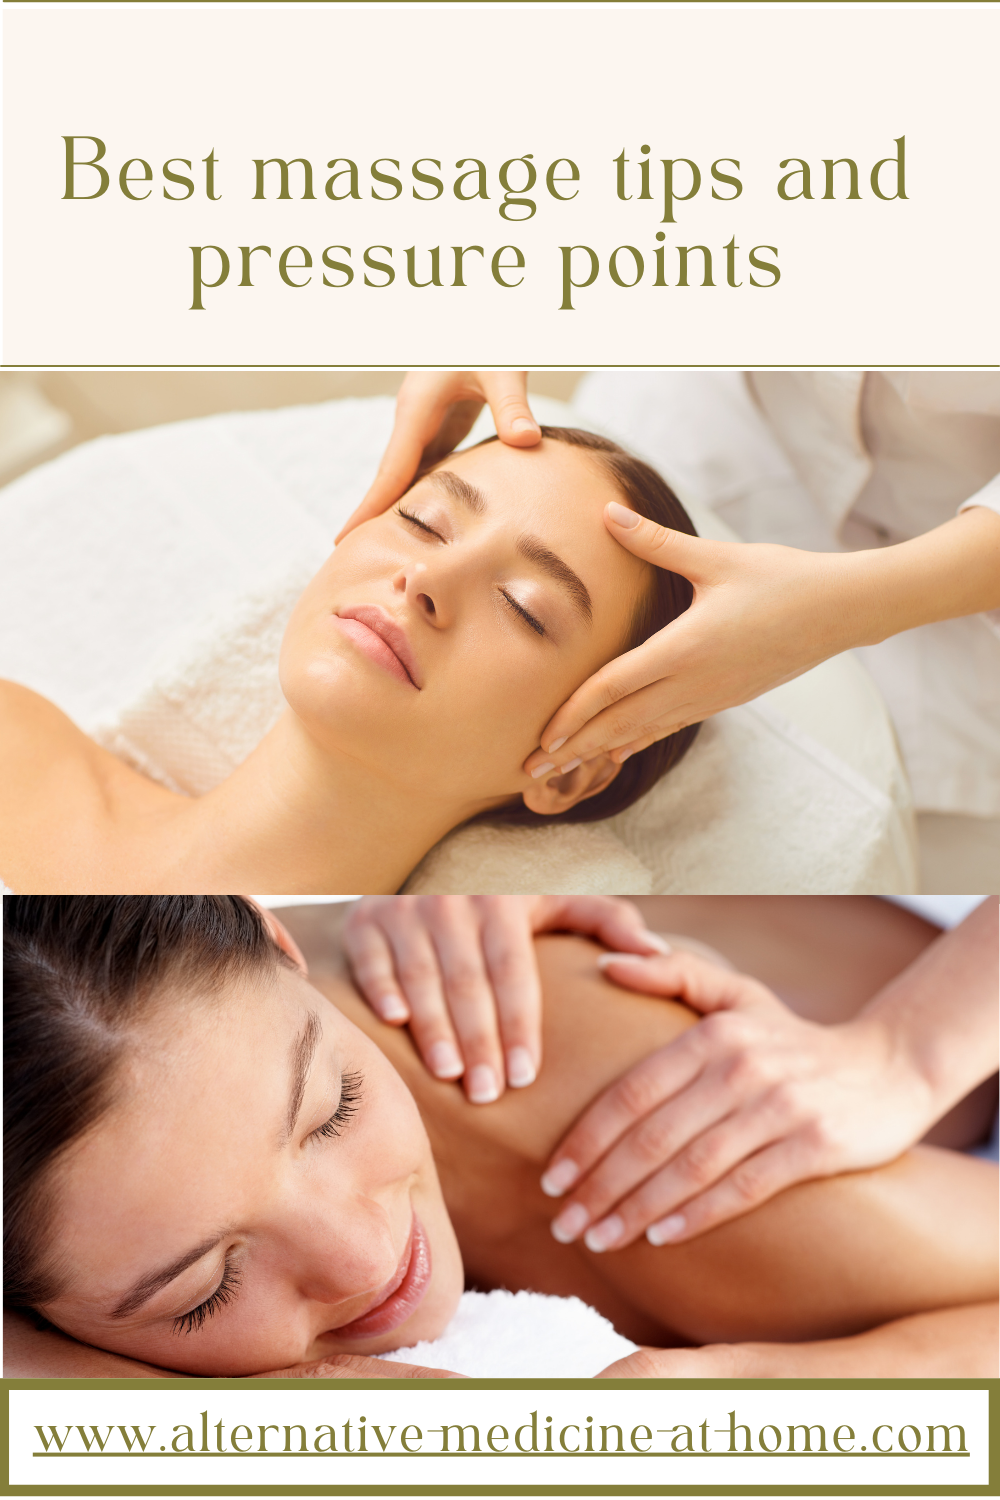 Some of the best massage tips and pressure points to remember when giving a full body massage.

Acupressure points or pressure points are not magic buttons that can turn health problems off like a light switch.

But used regularly and with care, they can re-balance the health of your body and mind so that the problems become less frequent in occurrence and intensity.